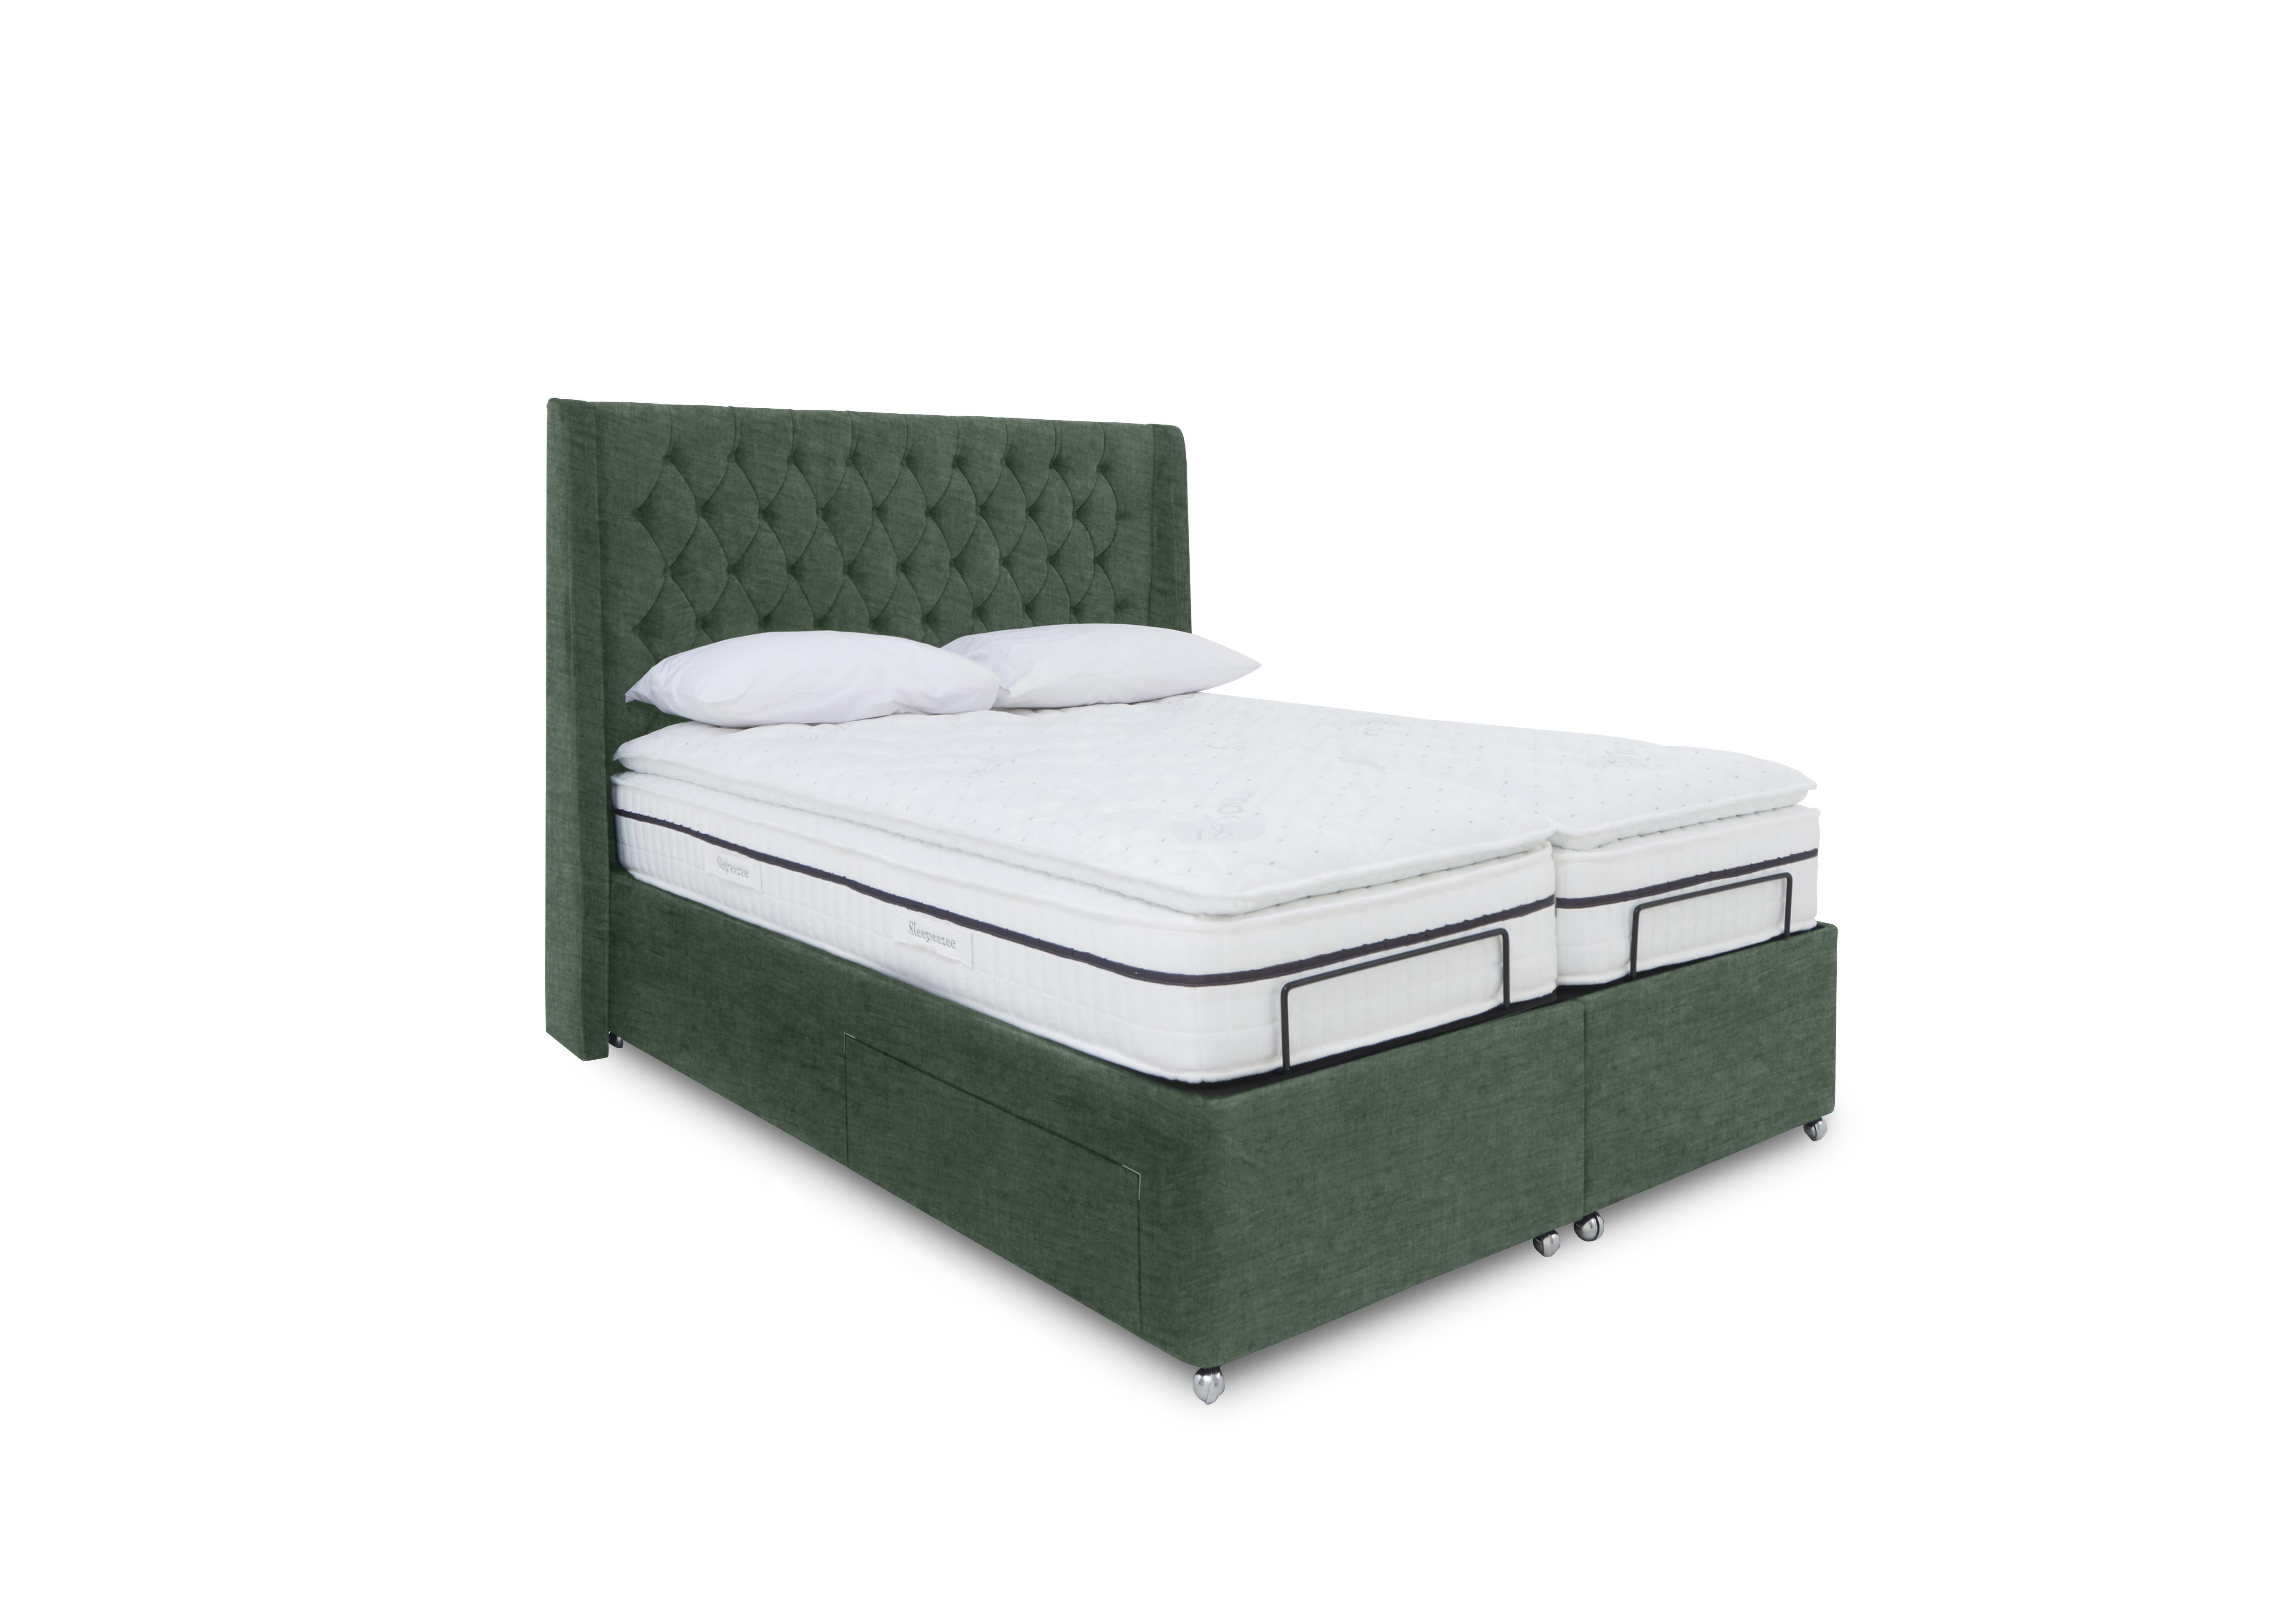 E-Motion Zen Dual Adjustable Divan Base with Massage Function and Headboard in 502 Tormaline Green on Furniture Village